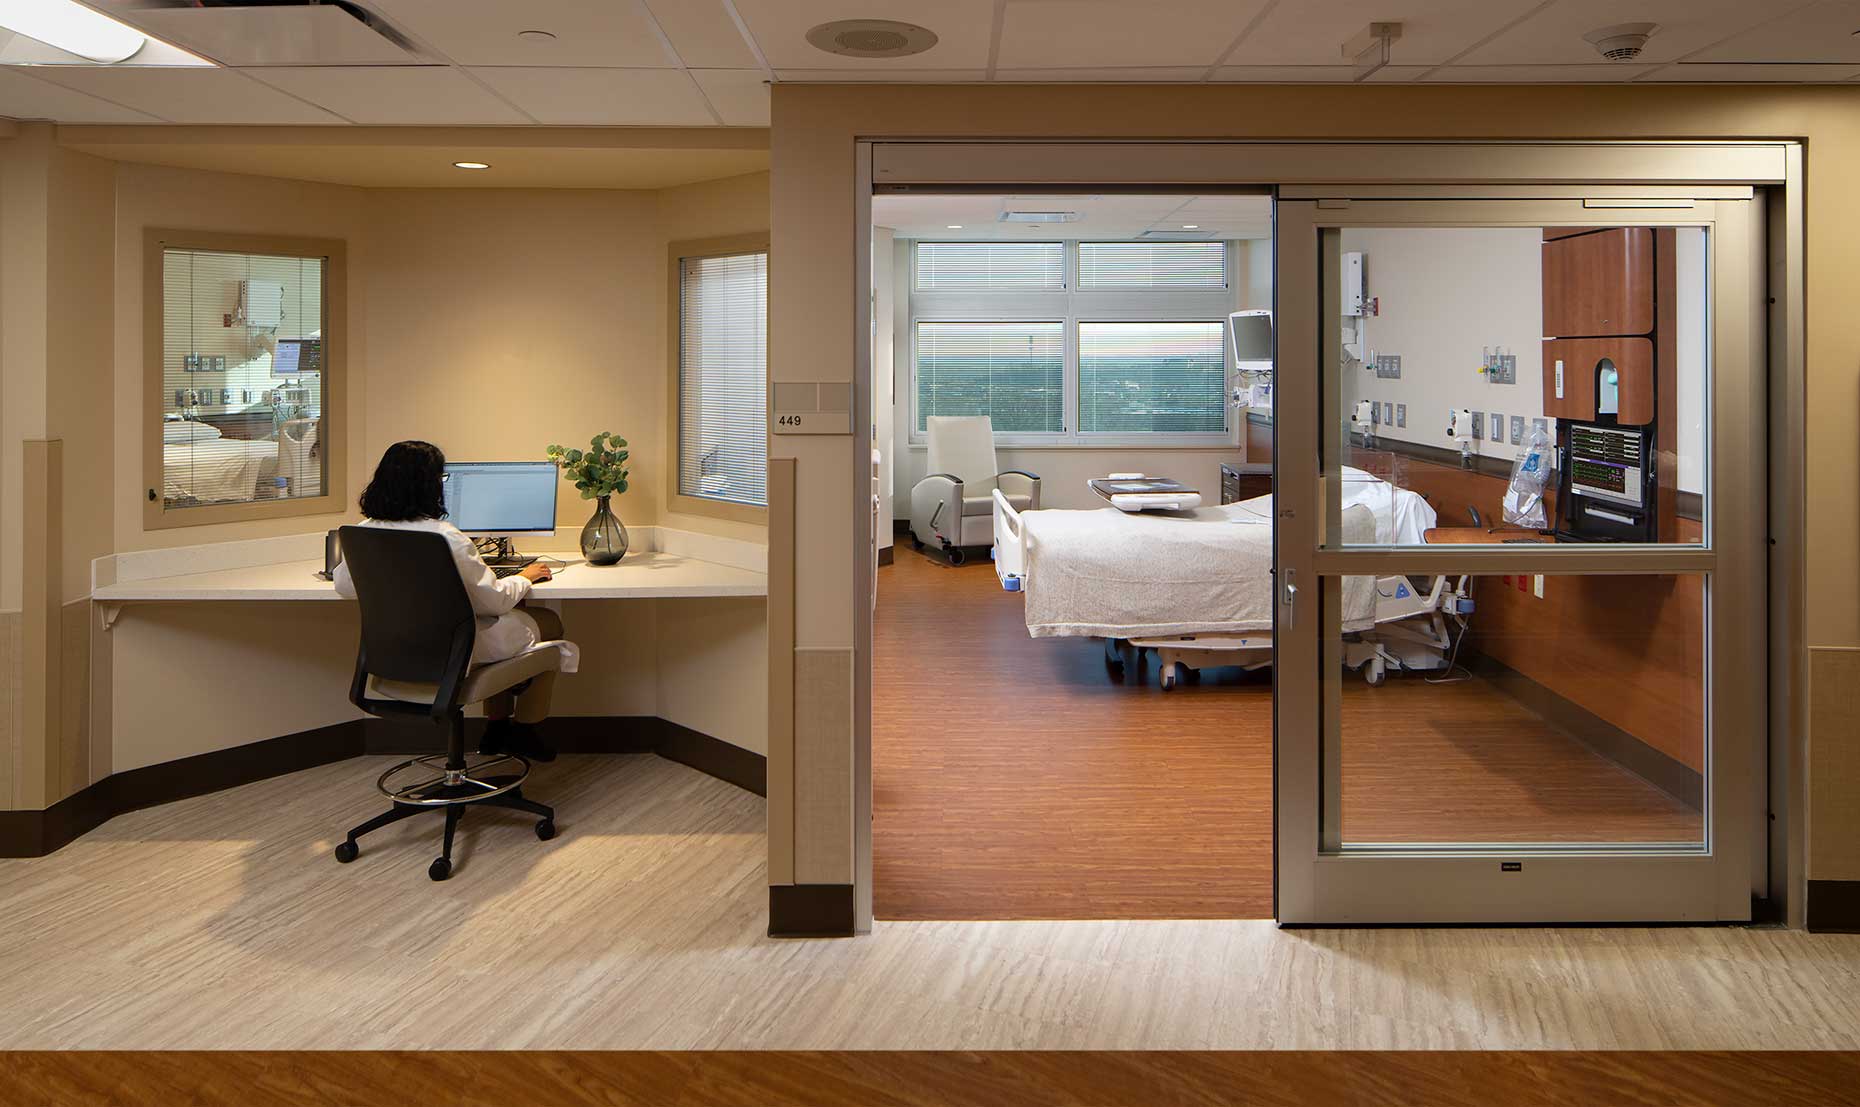 An image of a monitored patient room at Centerpoint Medical Center in Independence, Missouri